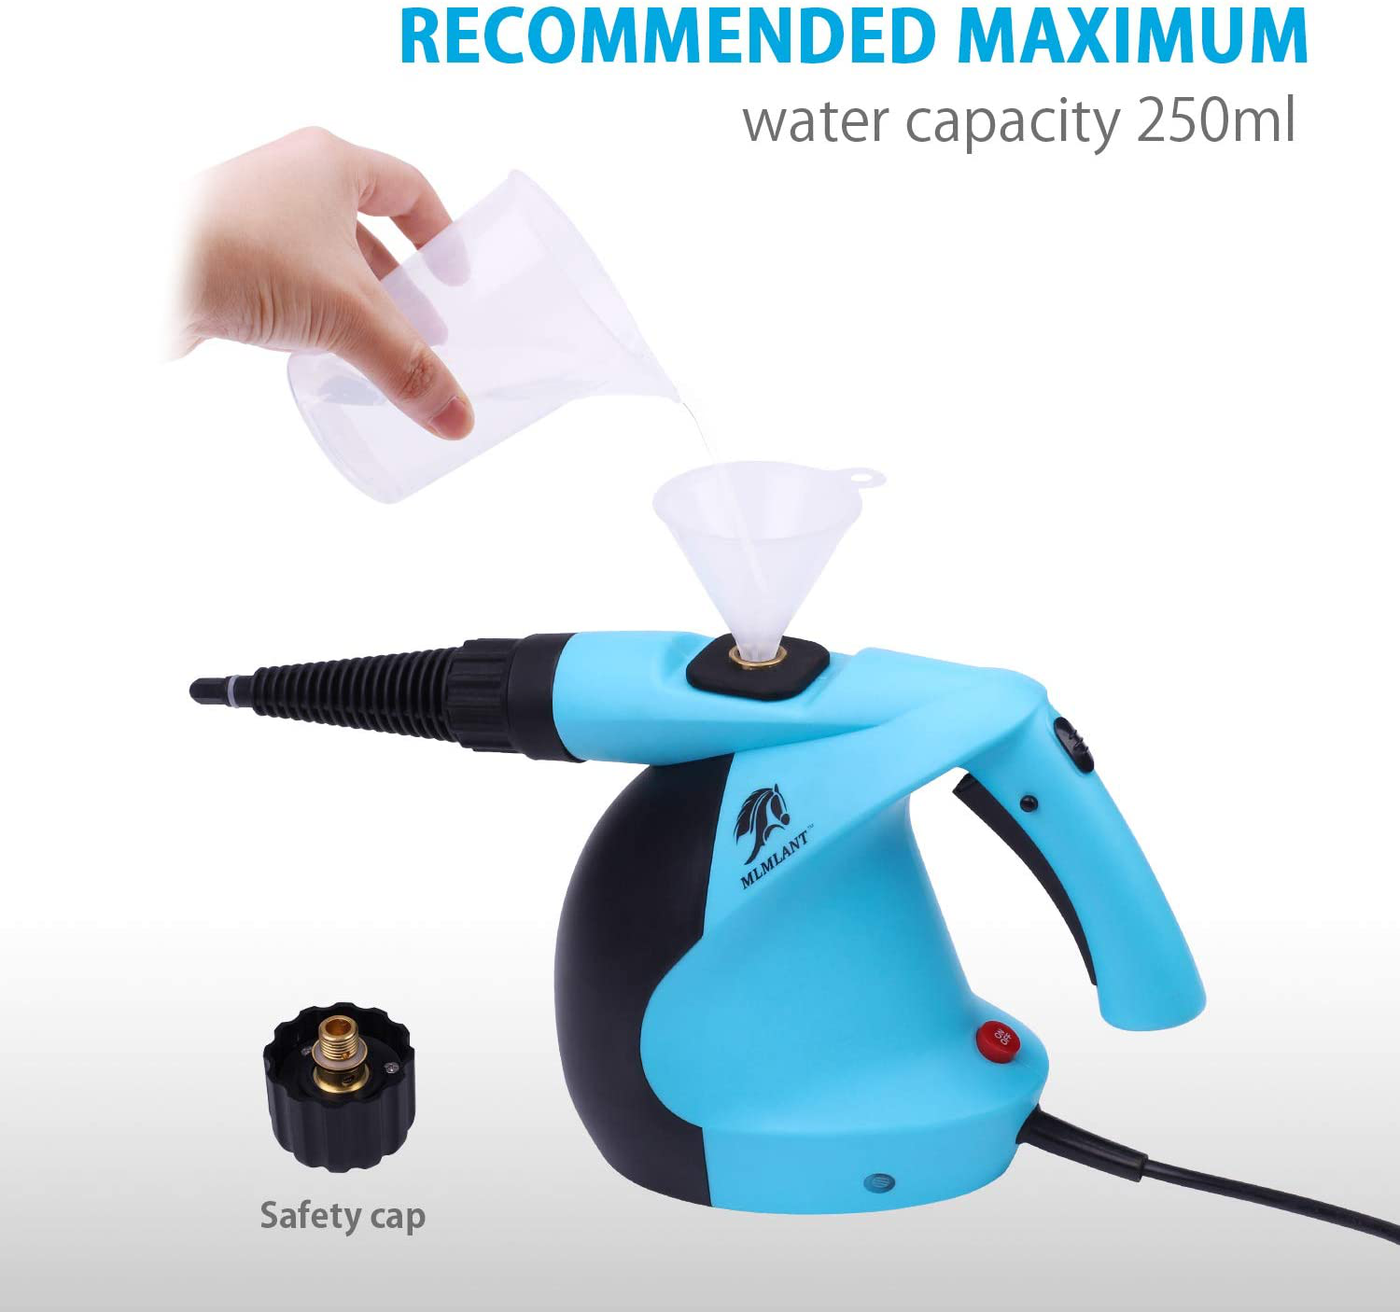 MLMLANT Steam Cleaner- Multi Purpose High Pressure Steamer with 11-Piece Accessories, Chemical-Free Steam Cleaning for Home, Stain Removal, Curtains, Car Seats, Floor